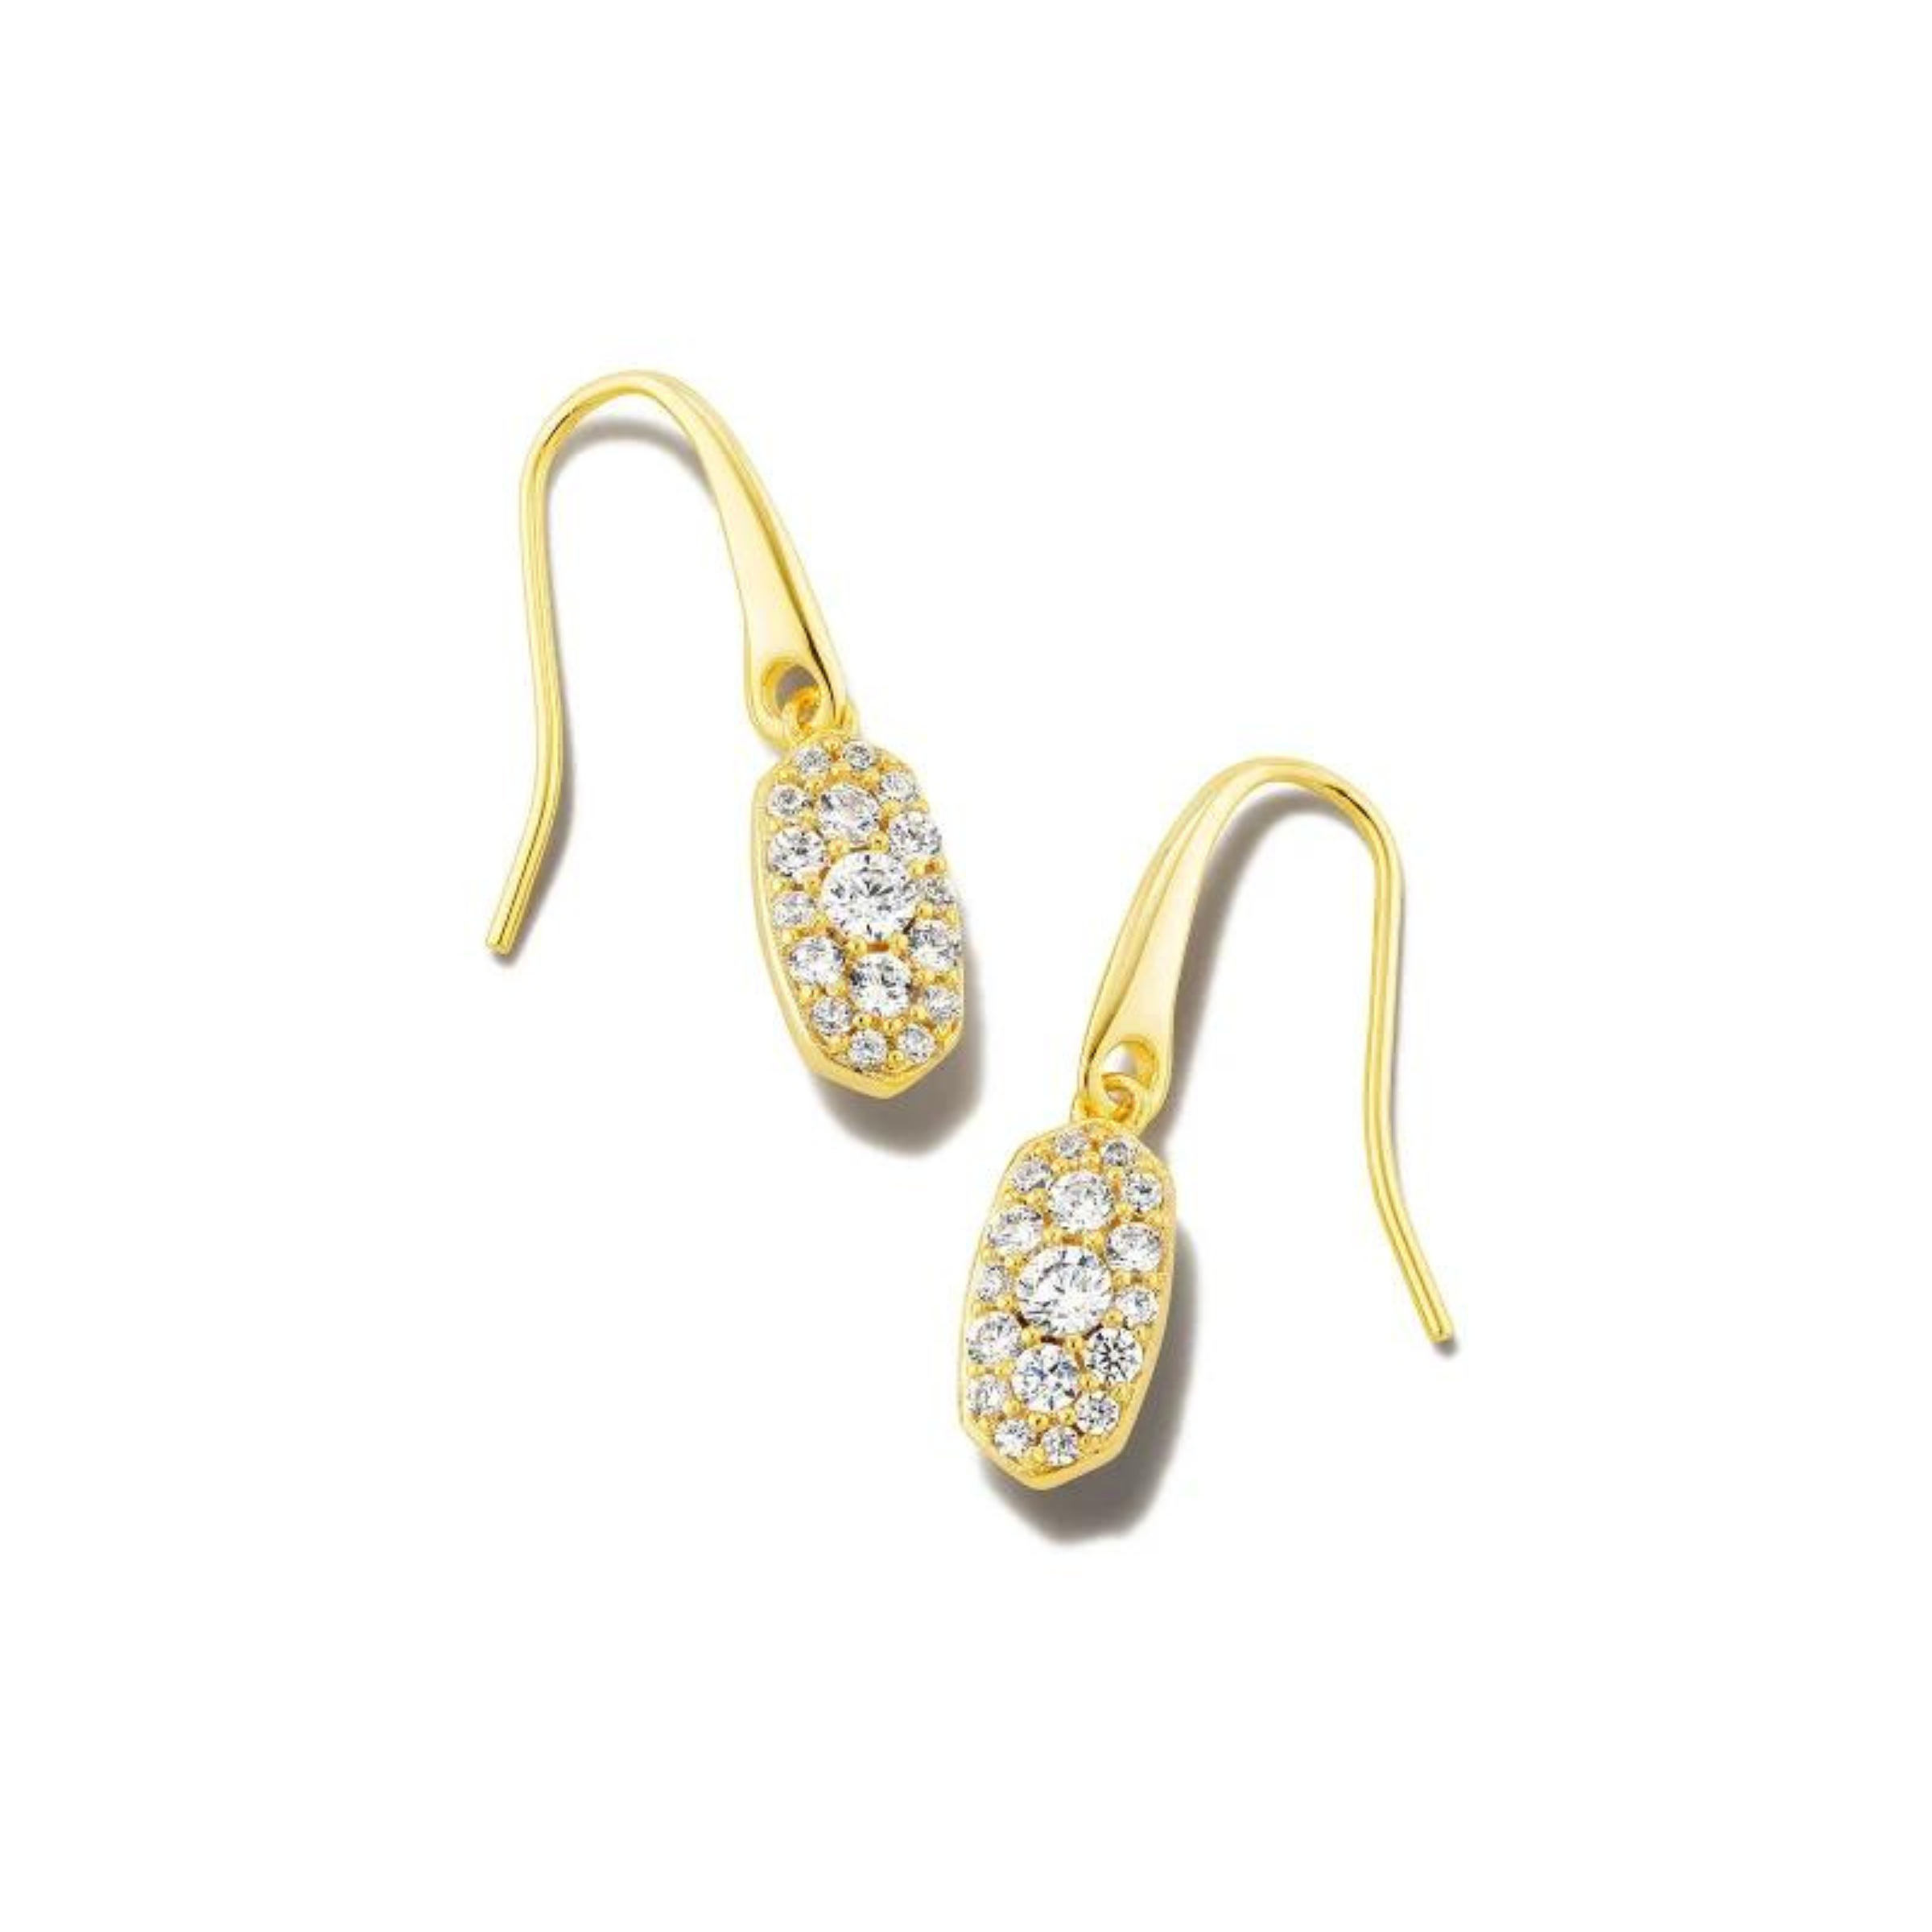 Gold, oval drop earrings with white crystals. These earrings are pictured on a white background. 